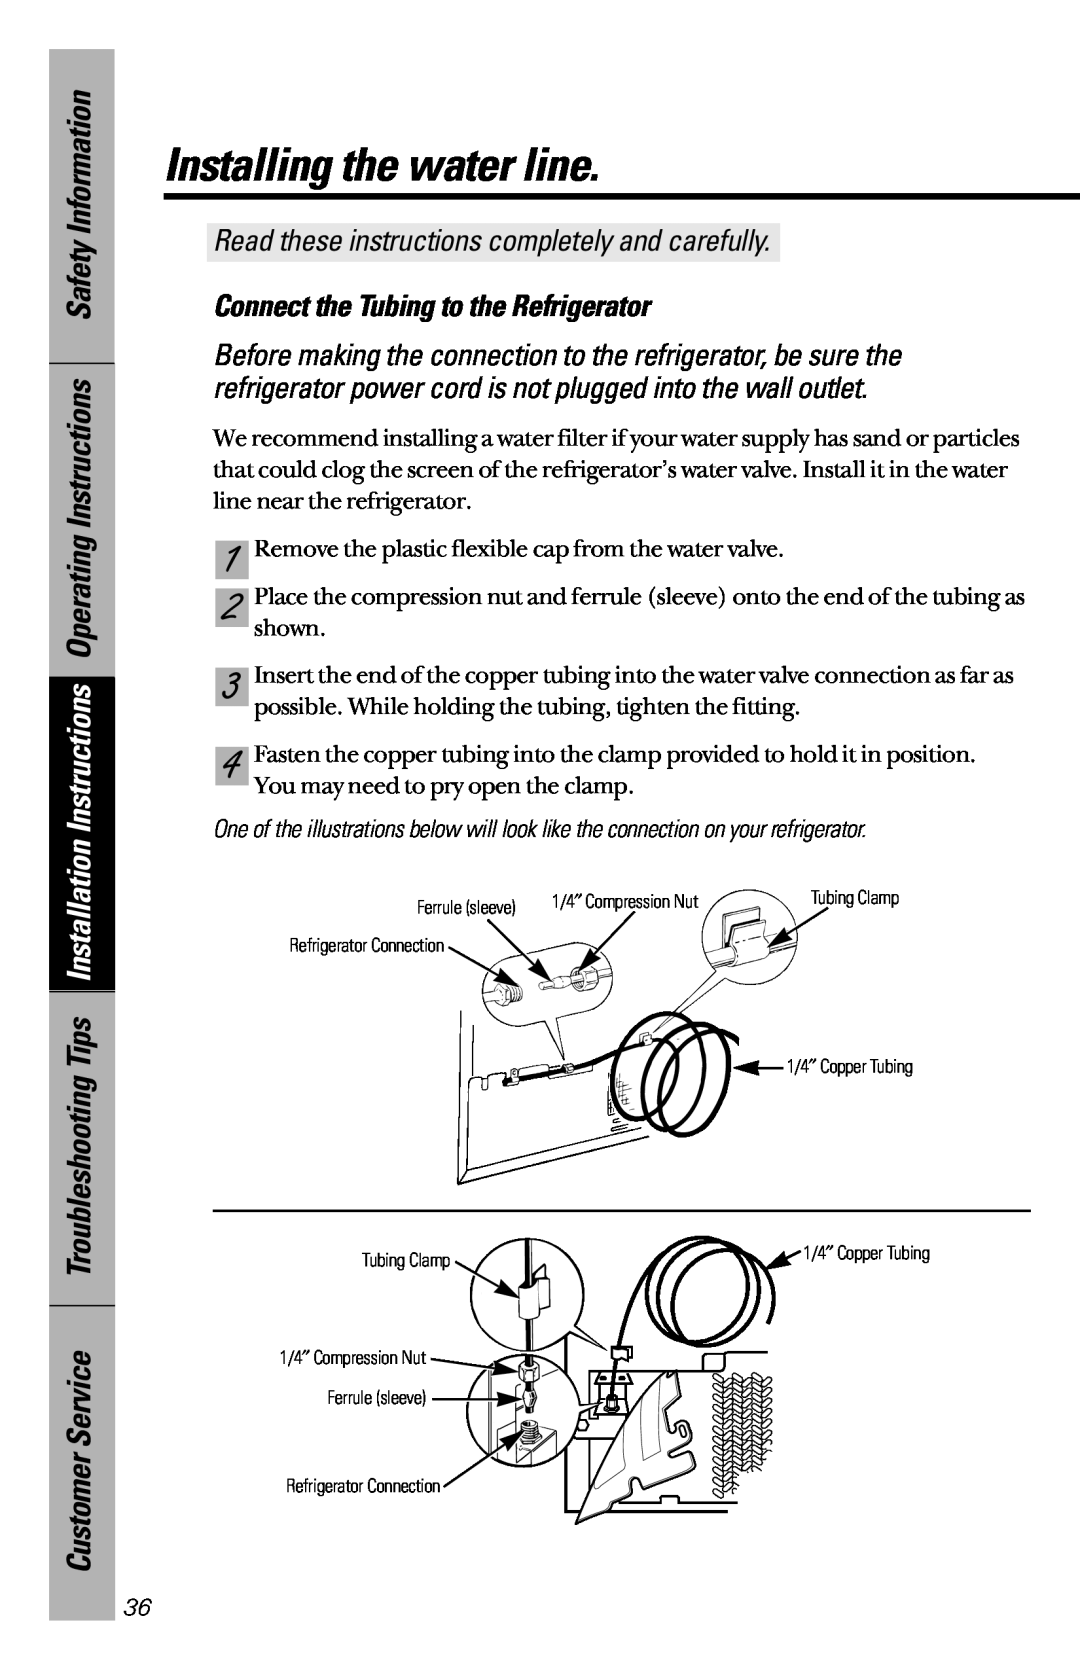 GE 28, 30 owner manual Connect the Tubing to the Refrigerator, Installing the water line 